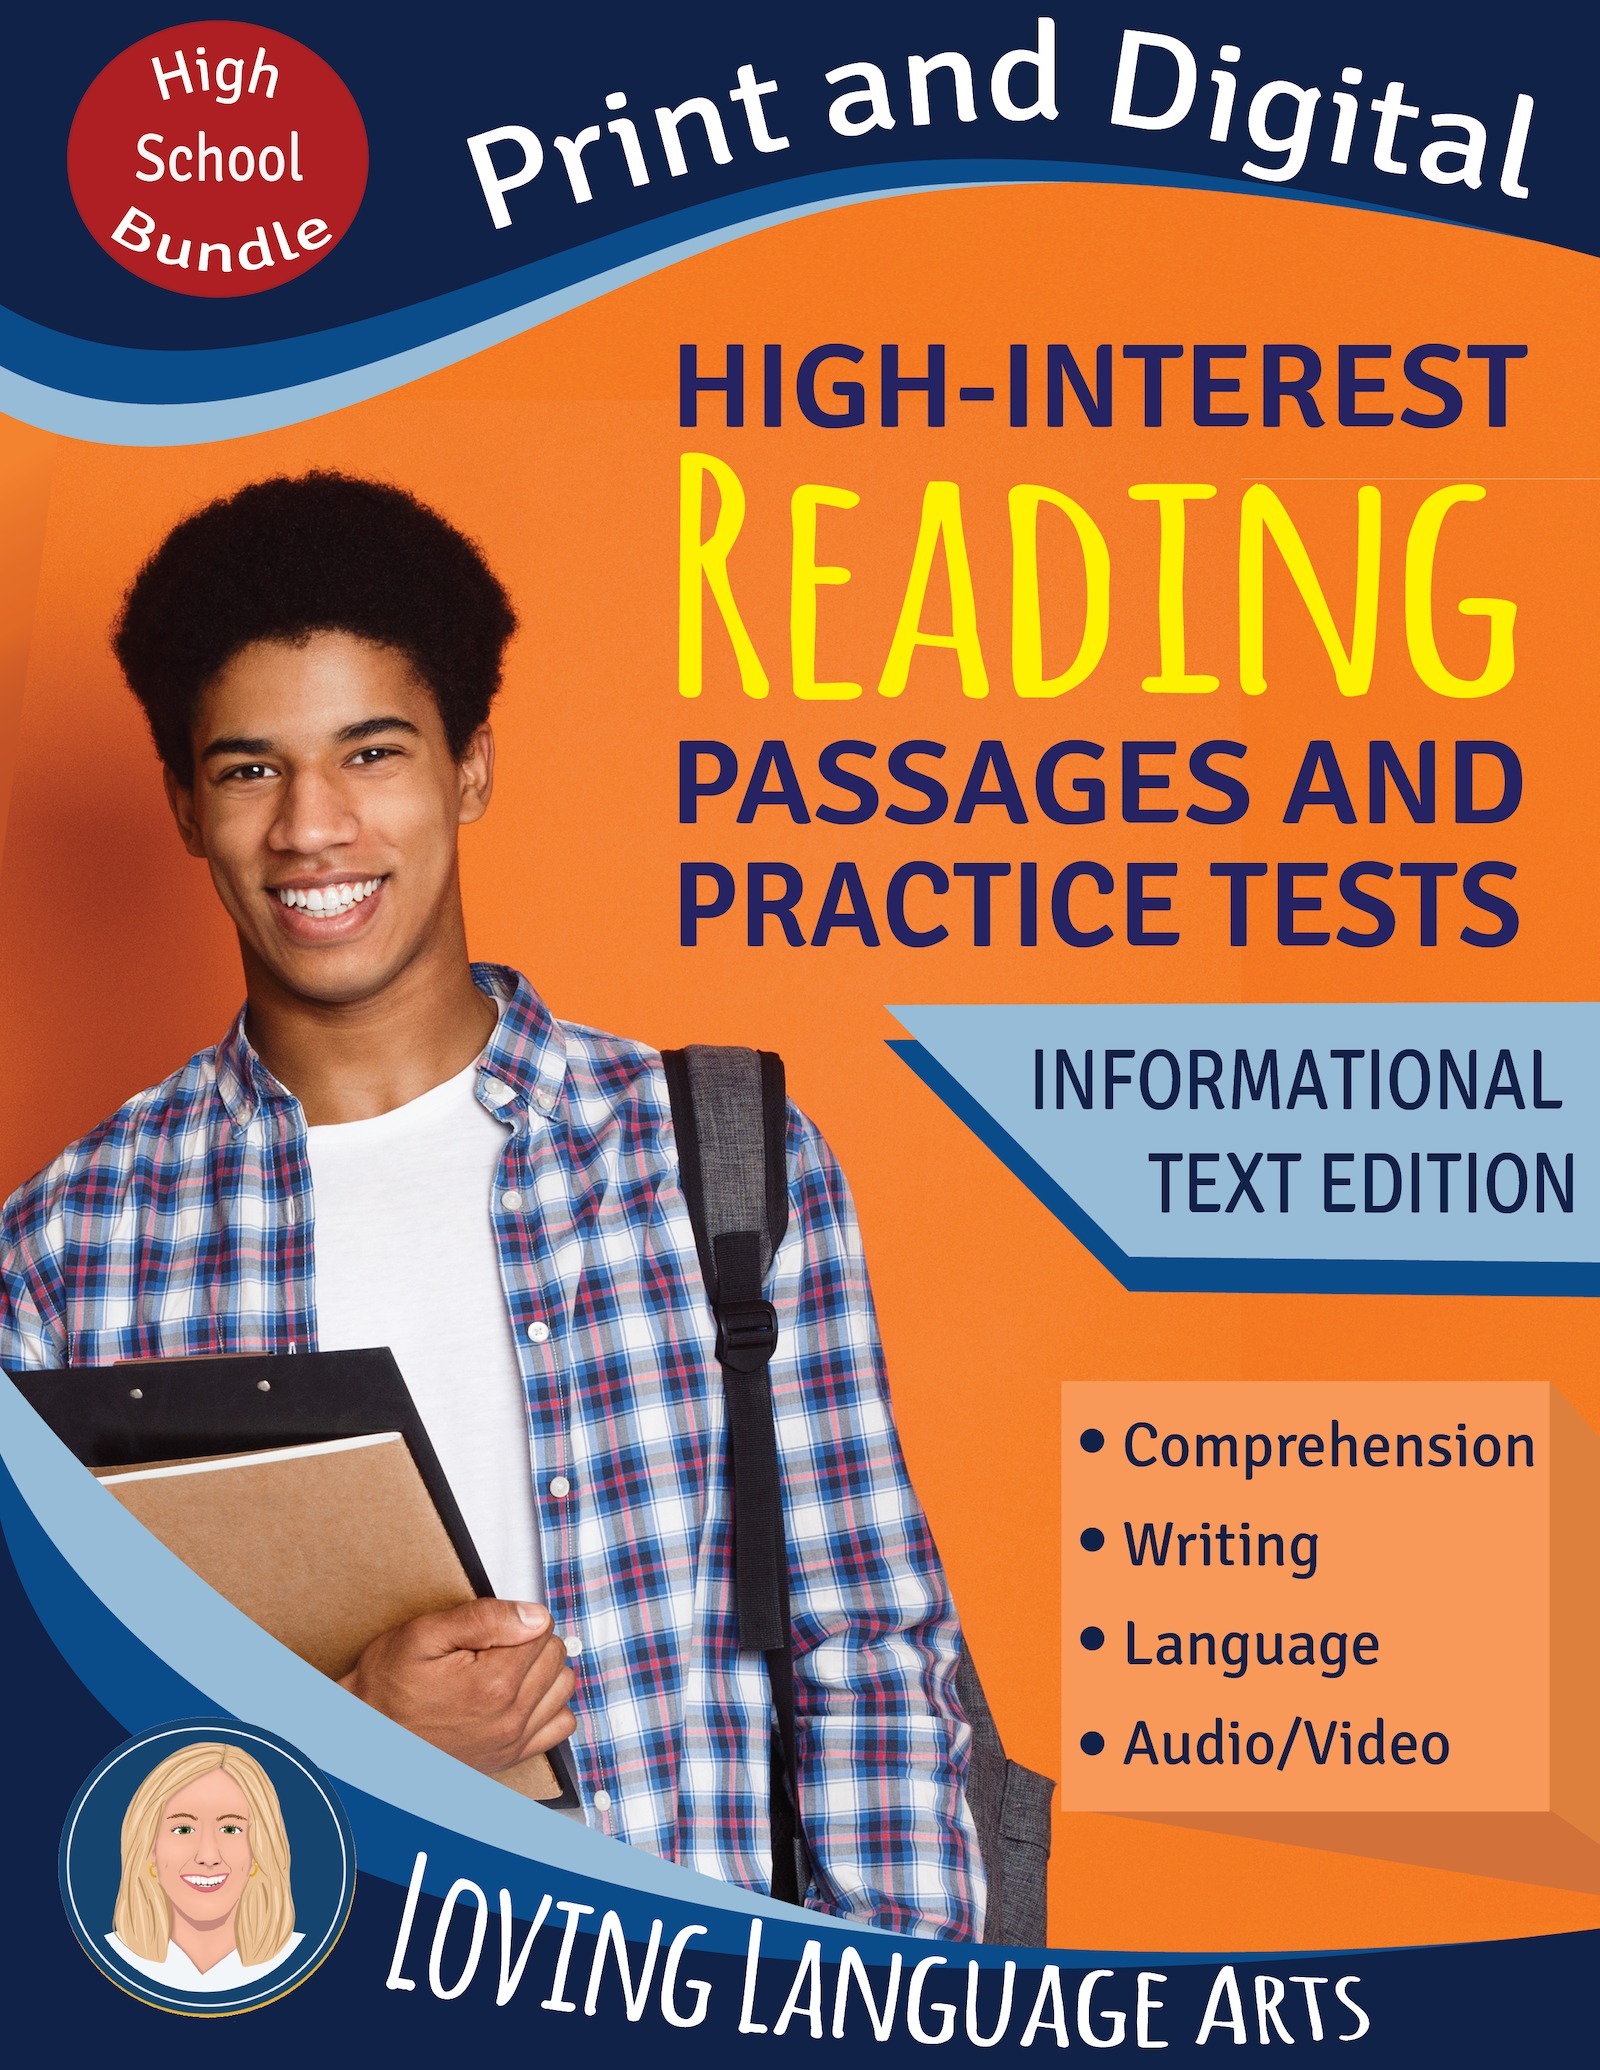 9th-12th grade language arts workbook - High-interest passages and practice tests.